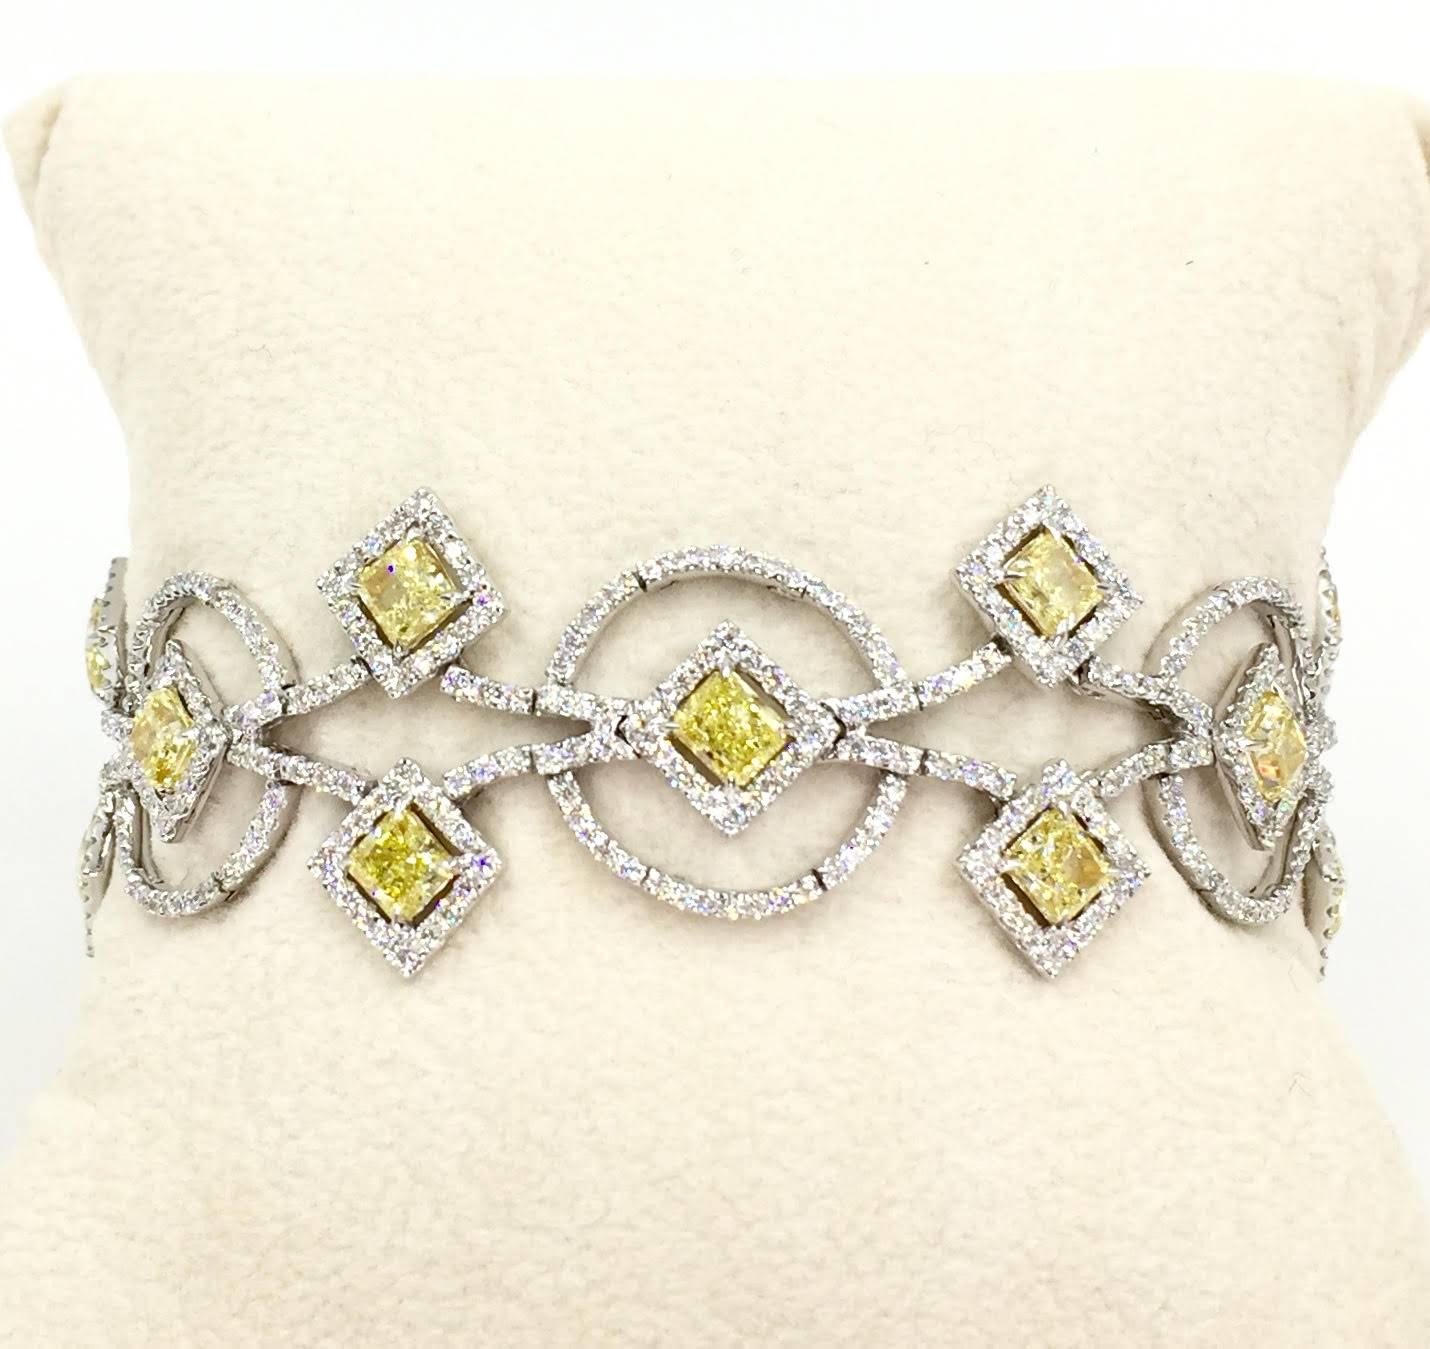 Radiant Cut White and Yellow Diamond Art Deco Inspired Bracelet 12.17 Carat For Sale